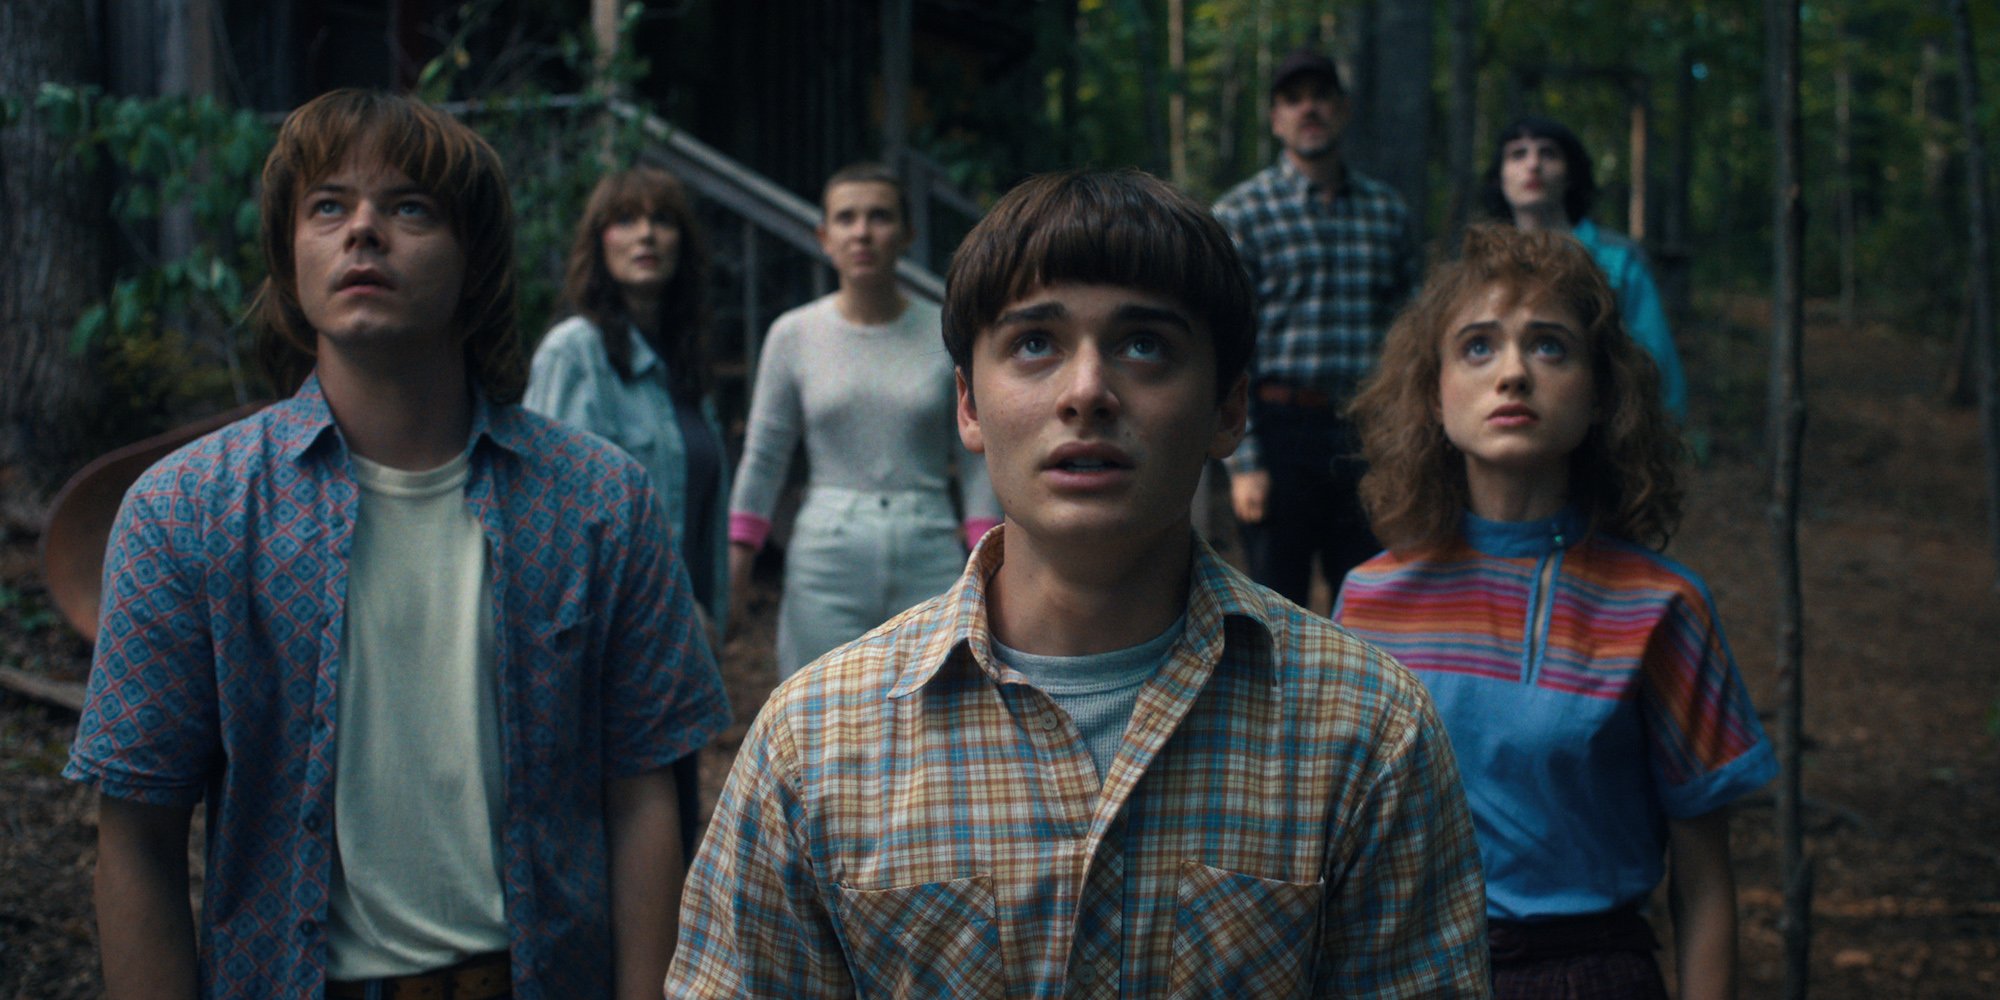 'Stranger Things' Season 4 production still with Noah Schnapp standing in front of his costars wearing a plaid shirt. One 'Stranger Things' Season 5 fan theory suggests Will is back in the spotlight.